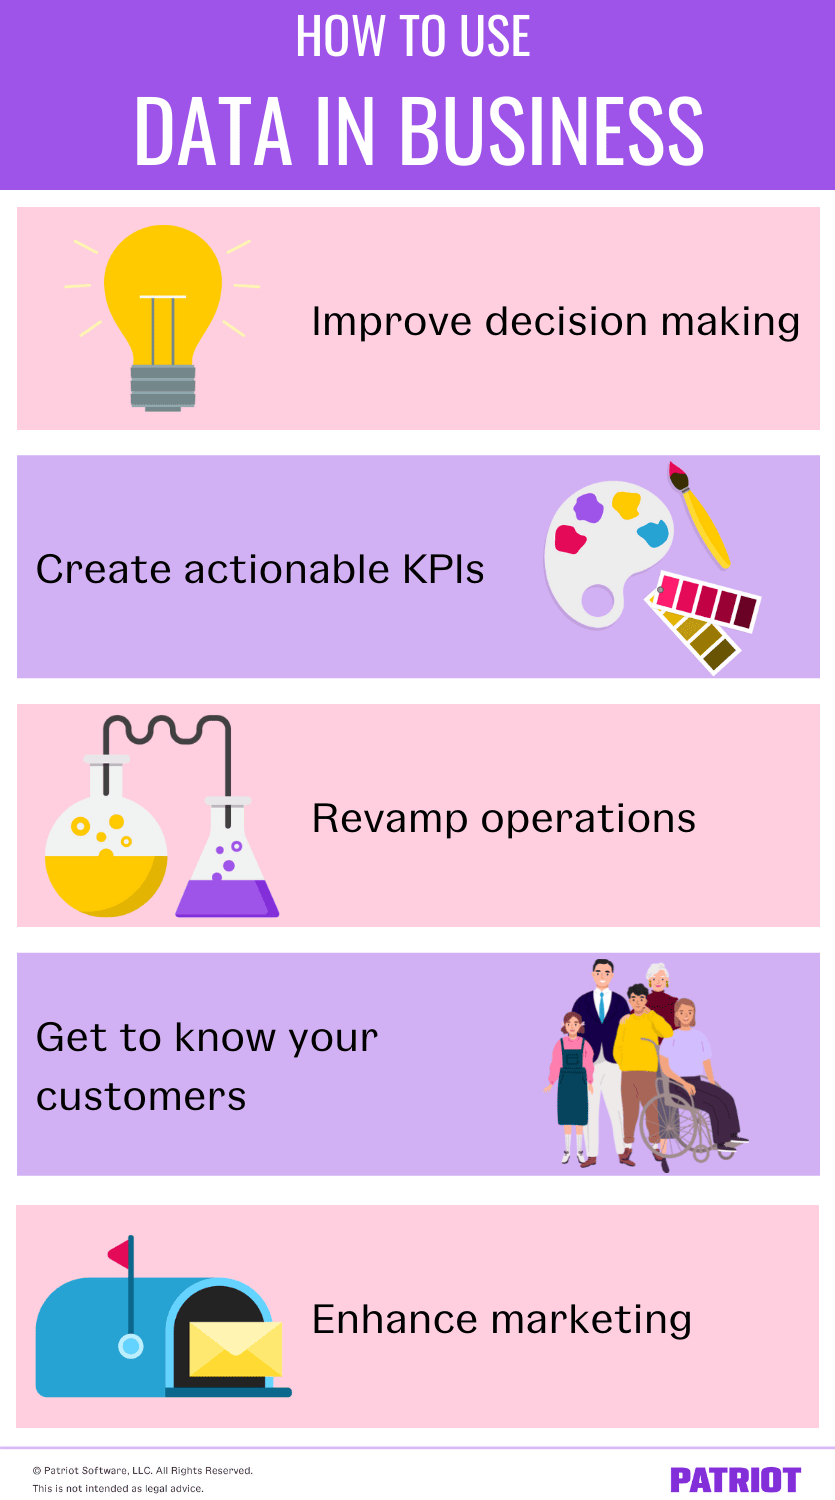 How to use data in business: improve decision making, create actionable KPIs, revamp operations, get to know your customers, enhance marketing